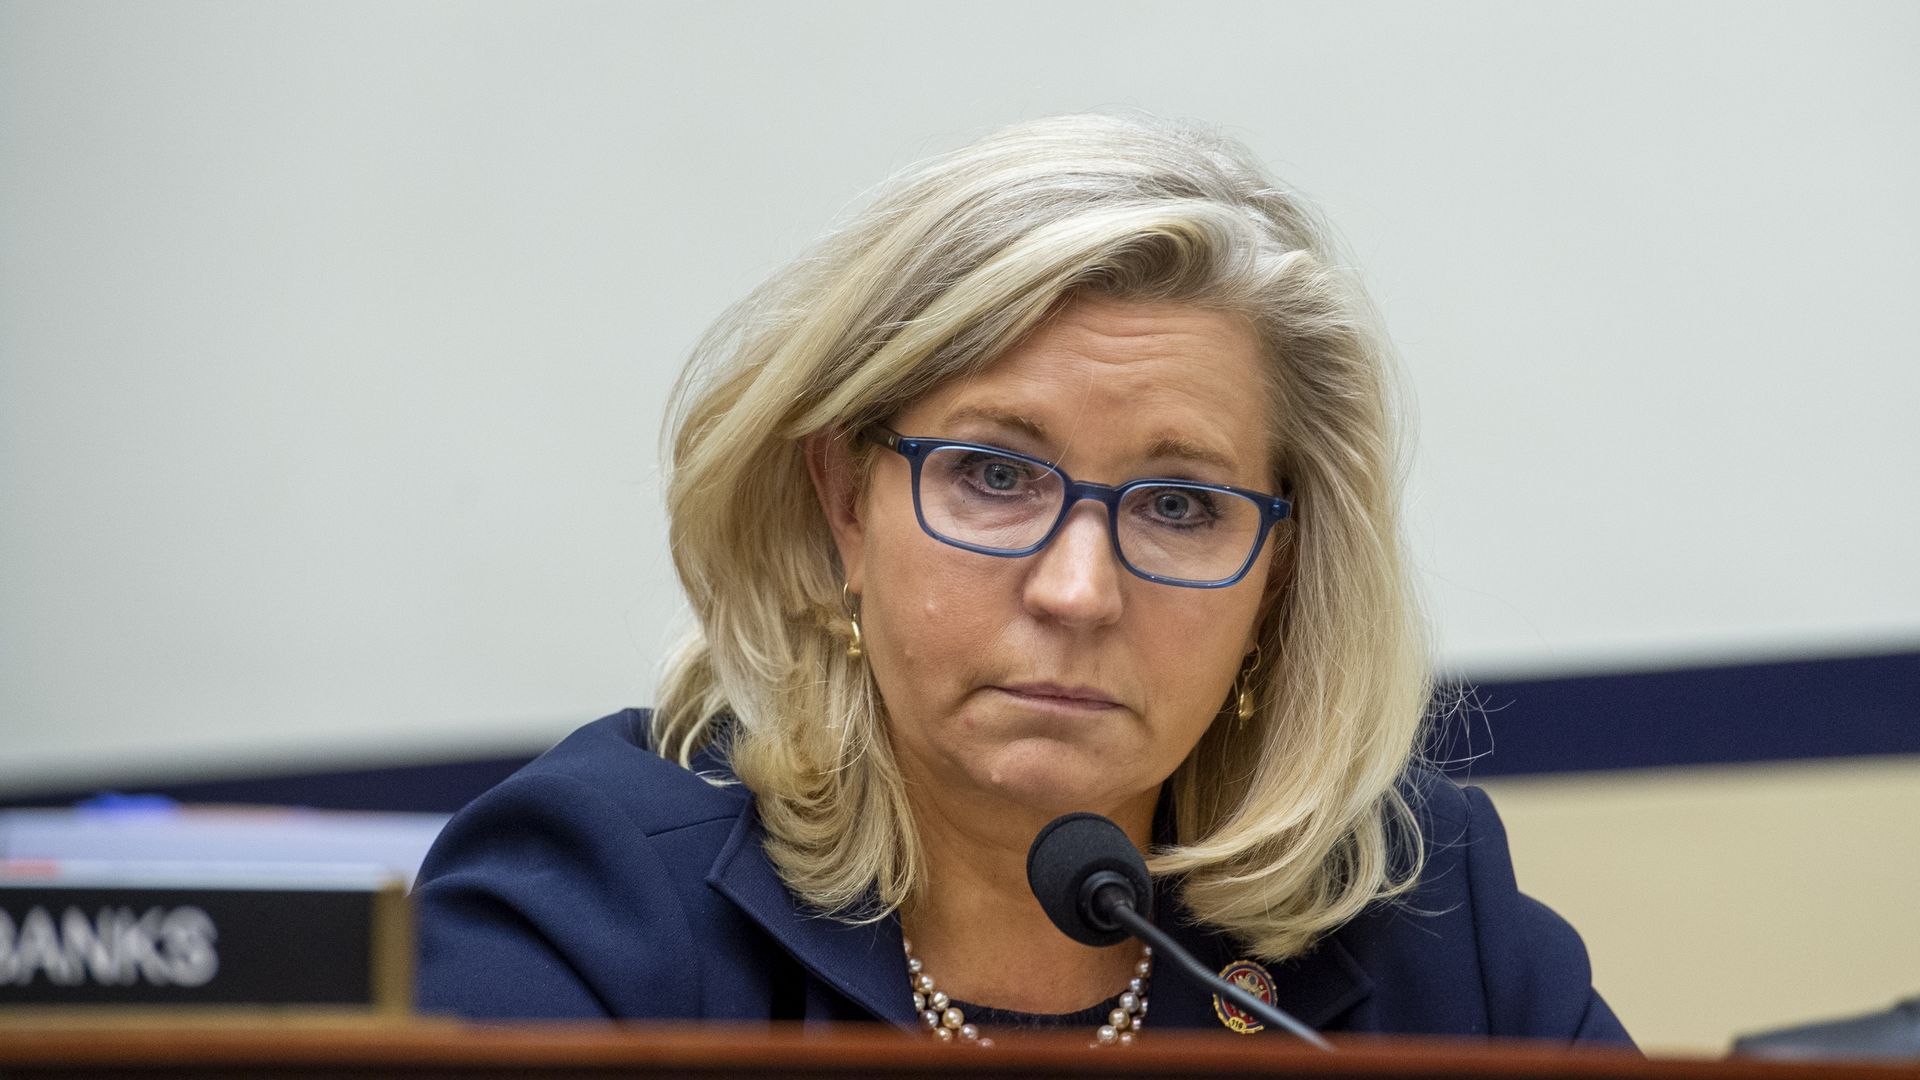  Rep. Liz Cheney (R-WY) attends a House Armed Services Committee hearing at the U.S. Capitol on September 29, 2021 in Washington, DC.